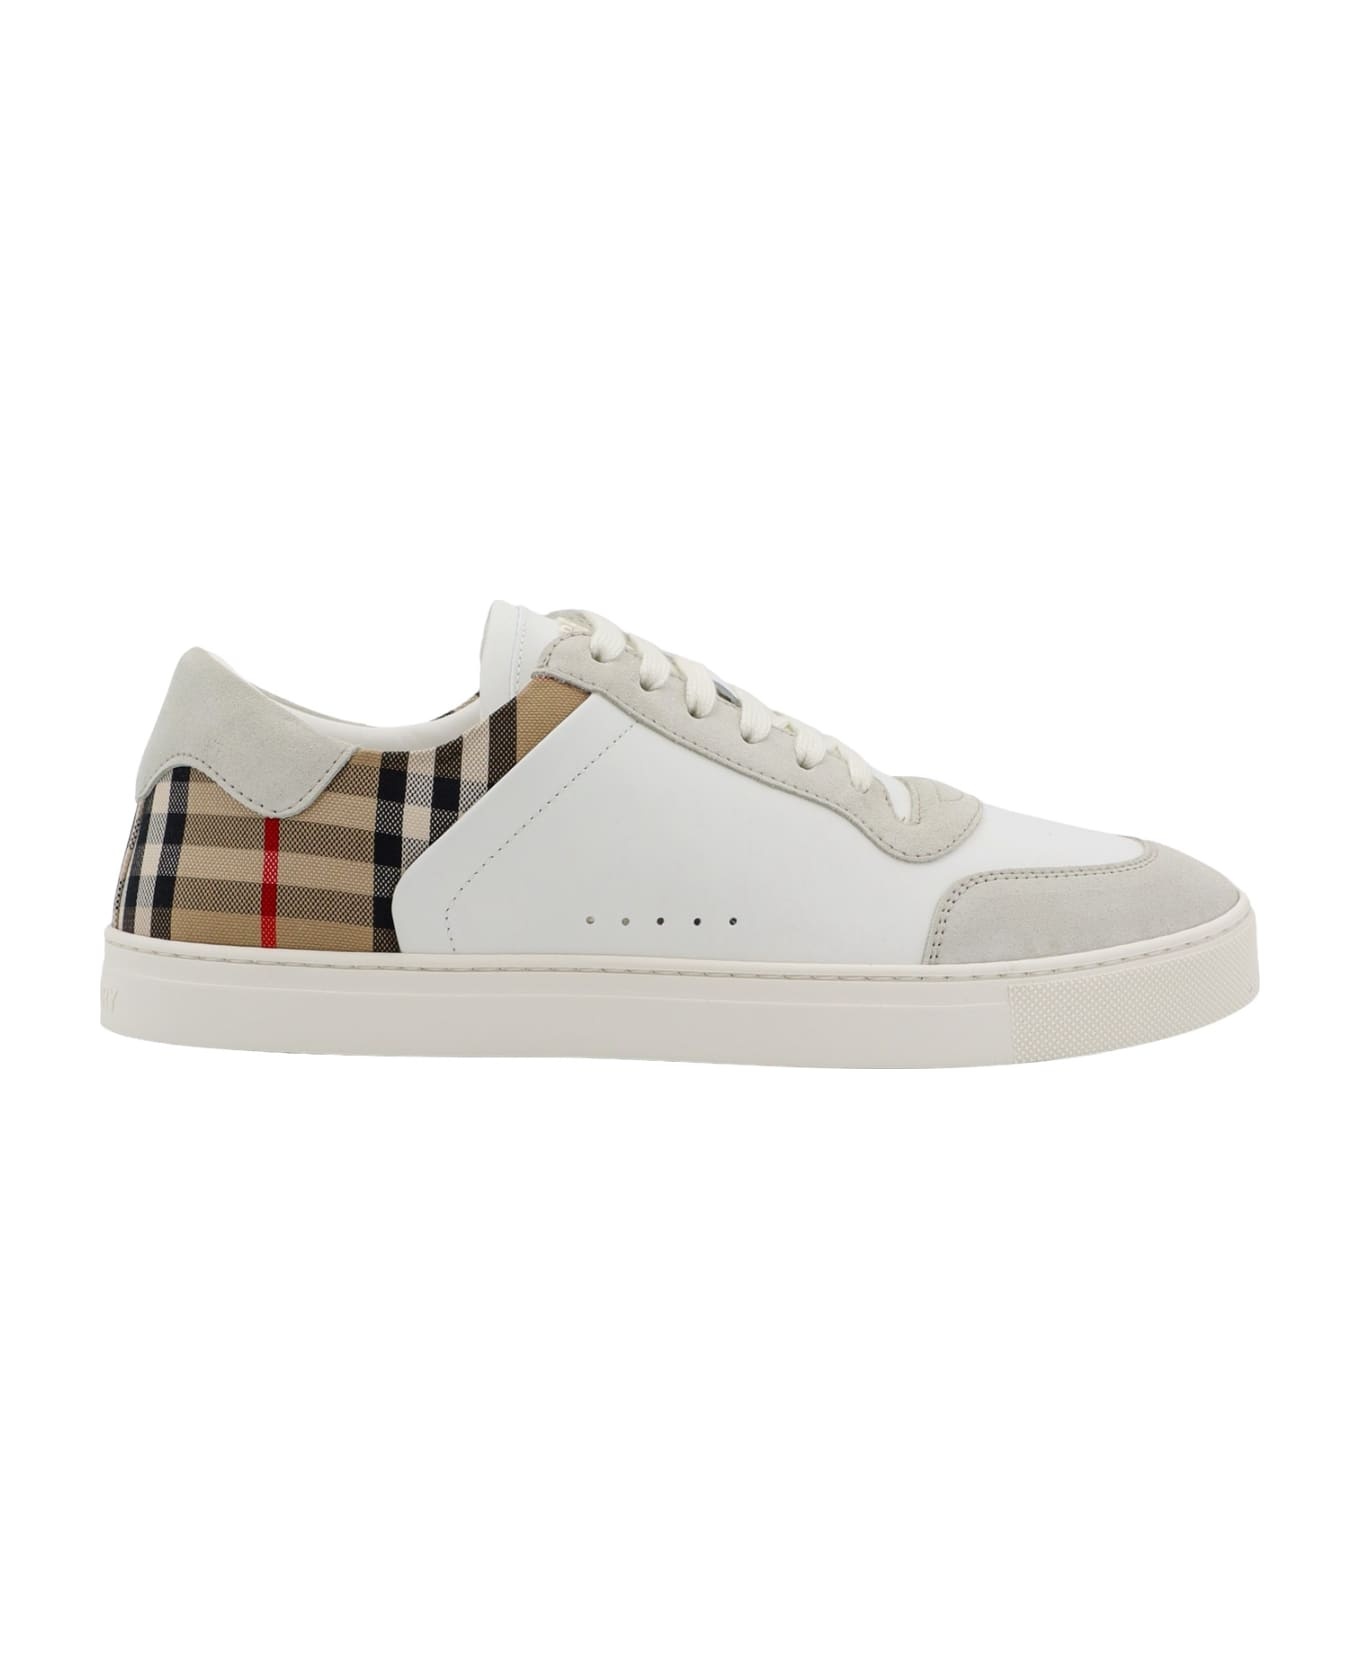 Multicolor Suede And Leather Sneakers - 1